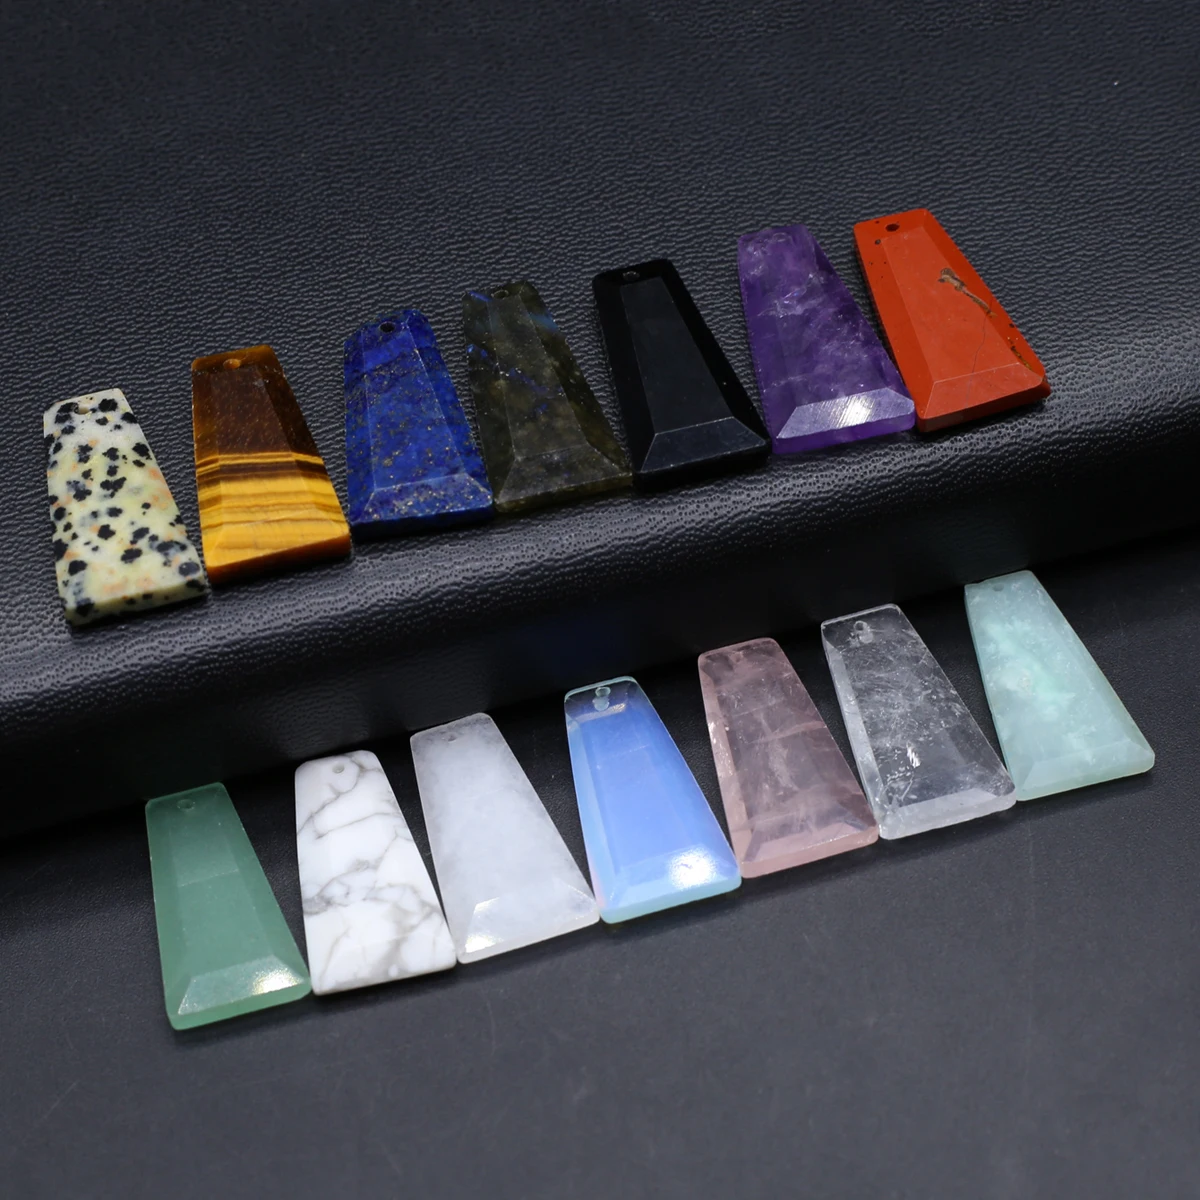 

Charms 5pcs Natural Stone Pendant Mix Color Natural Agates Pendant for Jewelry Making DIY Necklace Bracelet Earrings 13x25mm